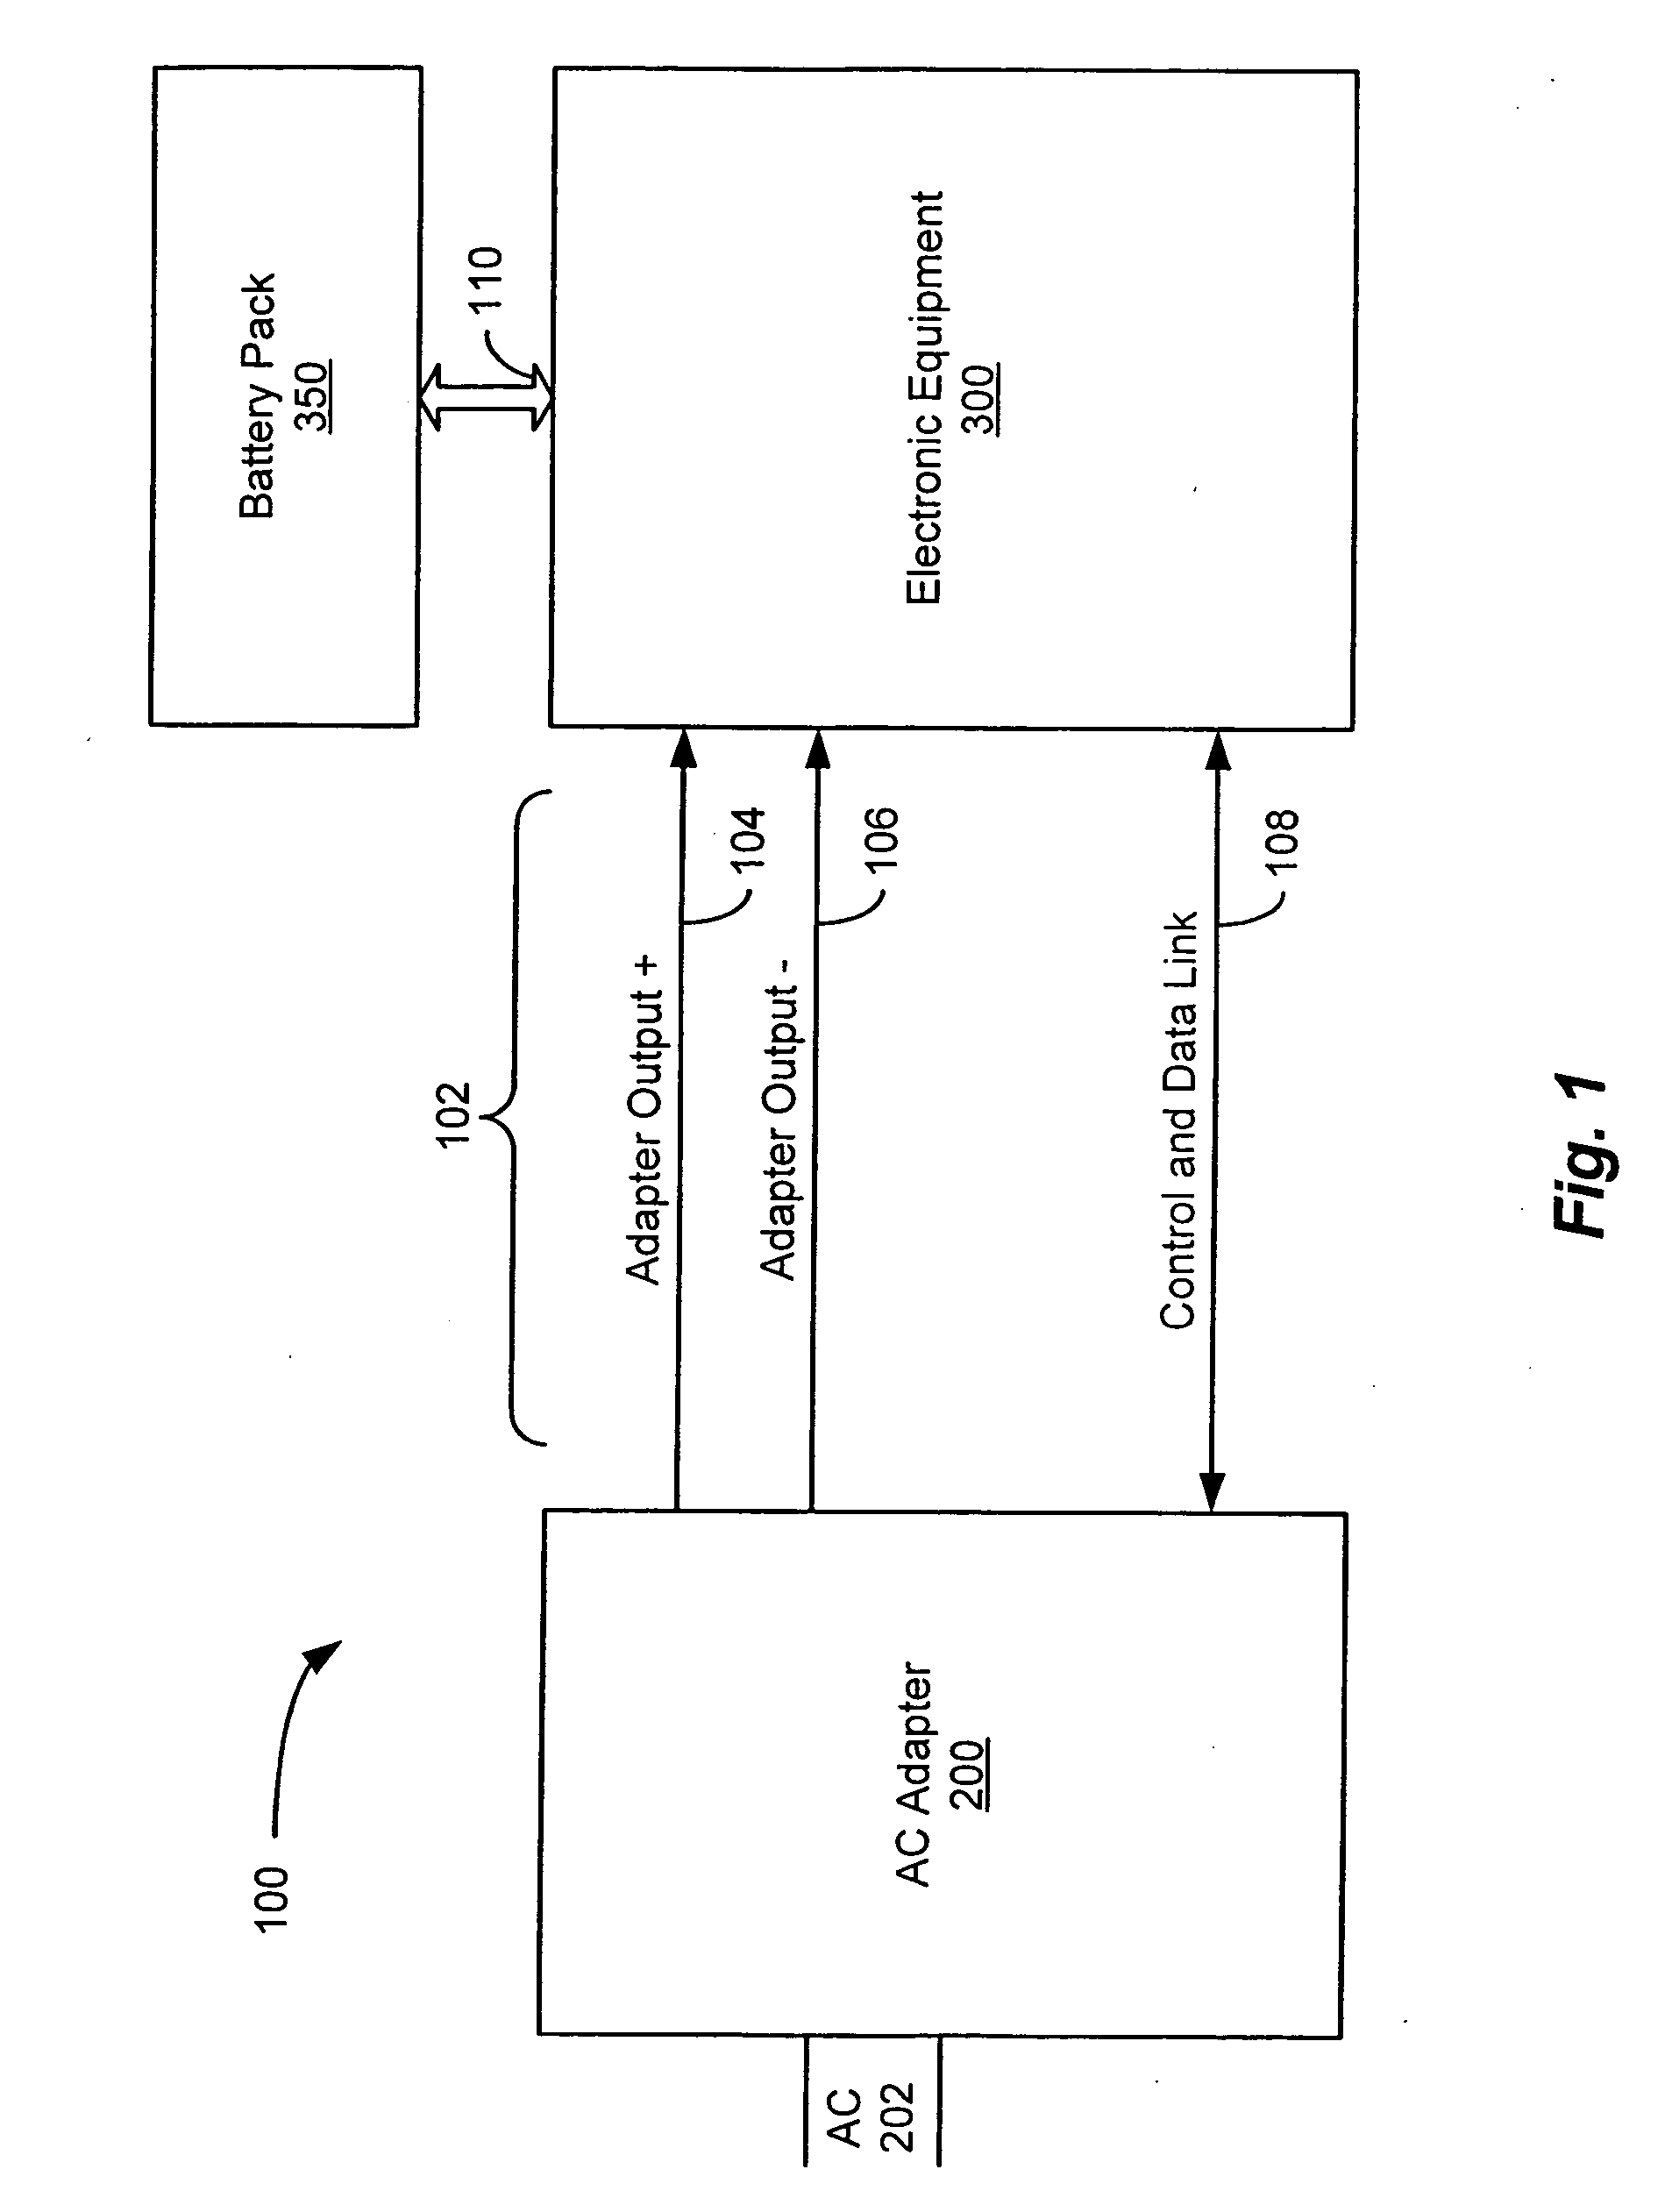 Single wire interface providing analog and digital communication between an AC power adapter and an electronic device